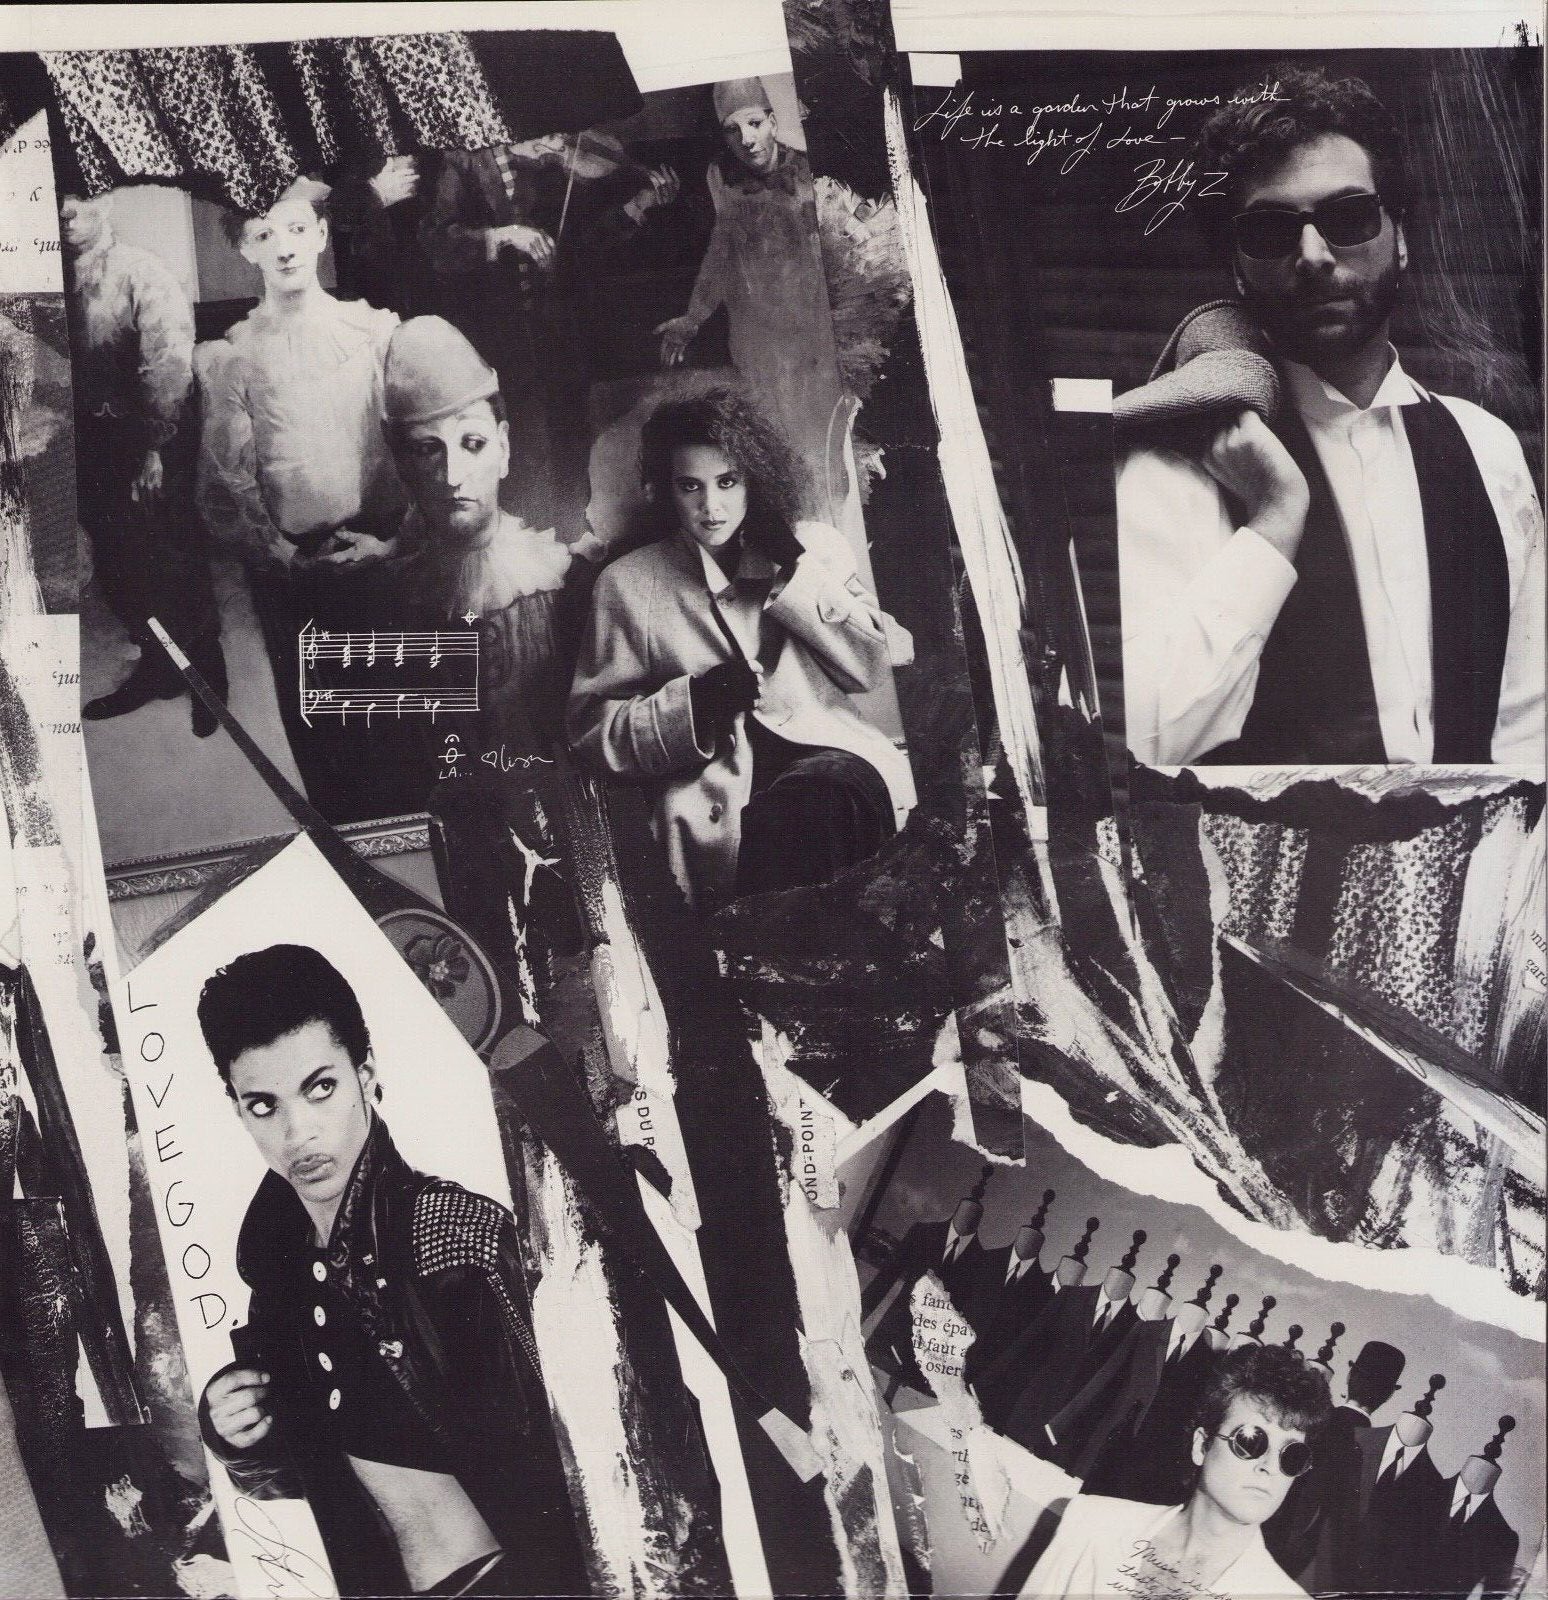 Prince And The Revolution - Parade Vinyl LP